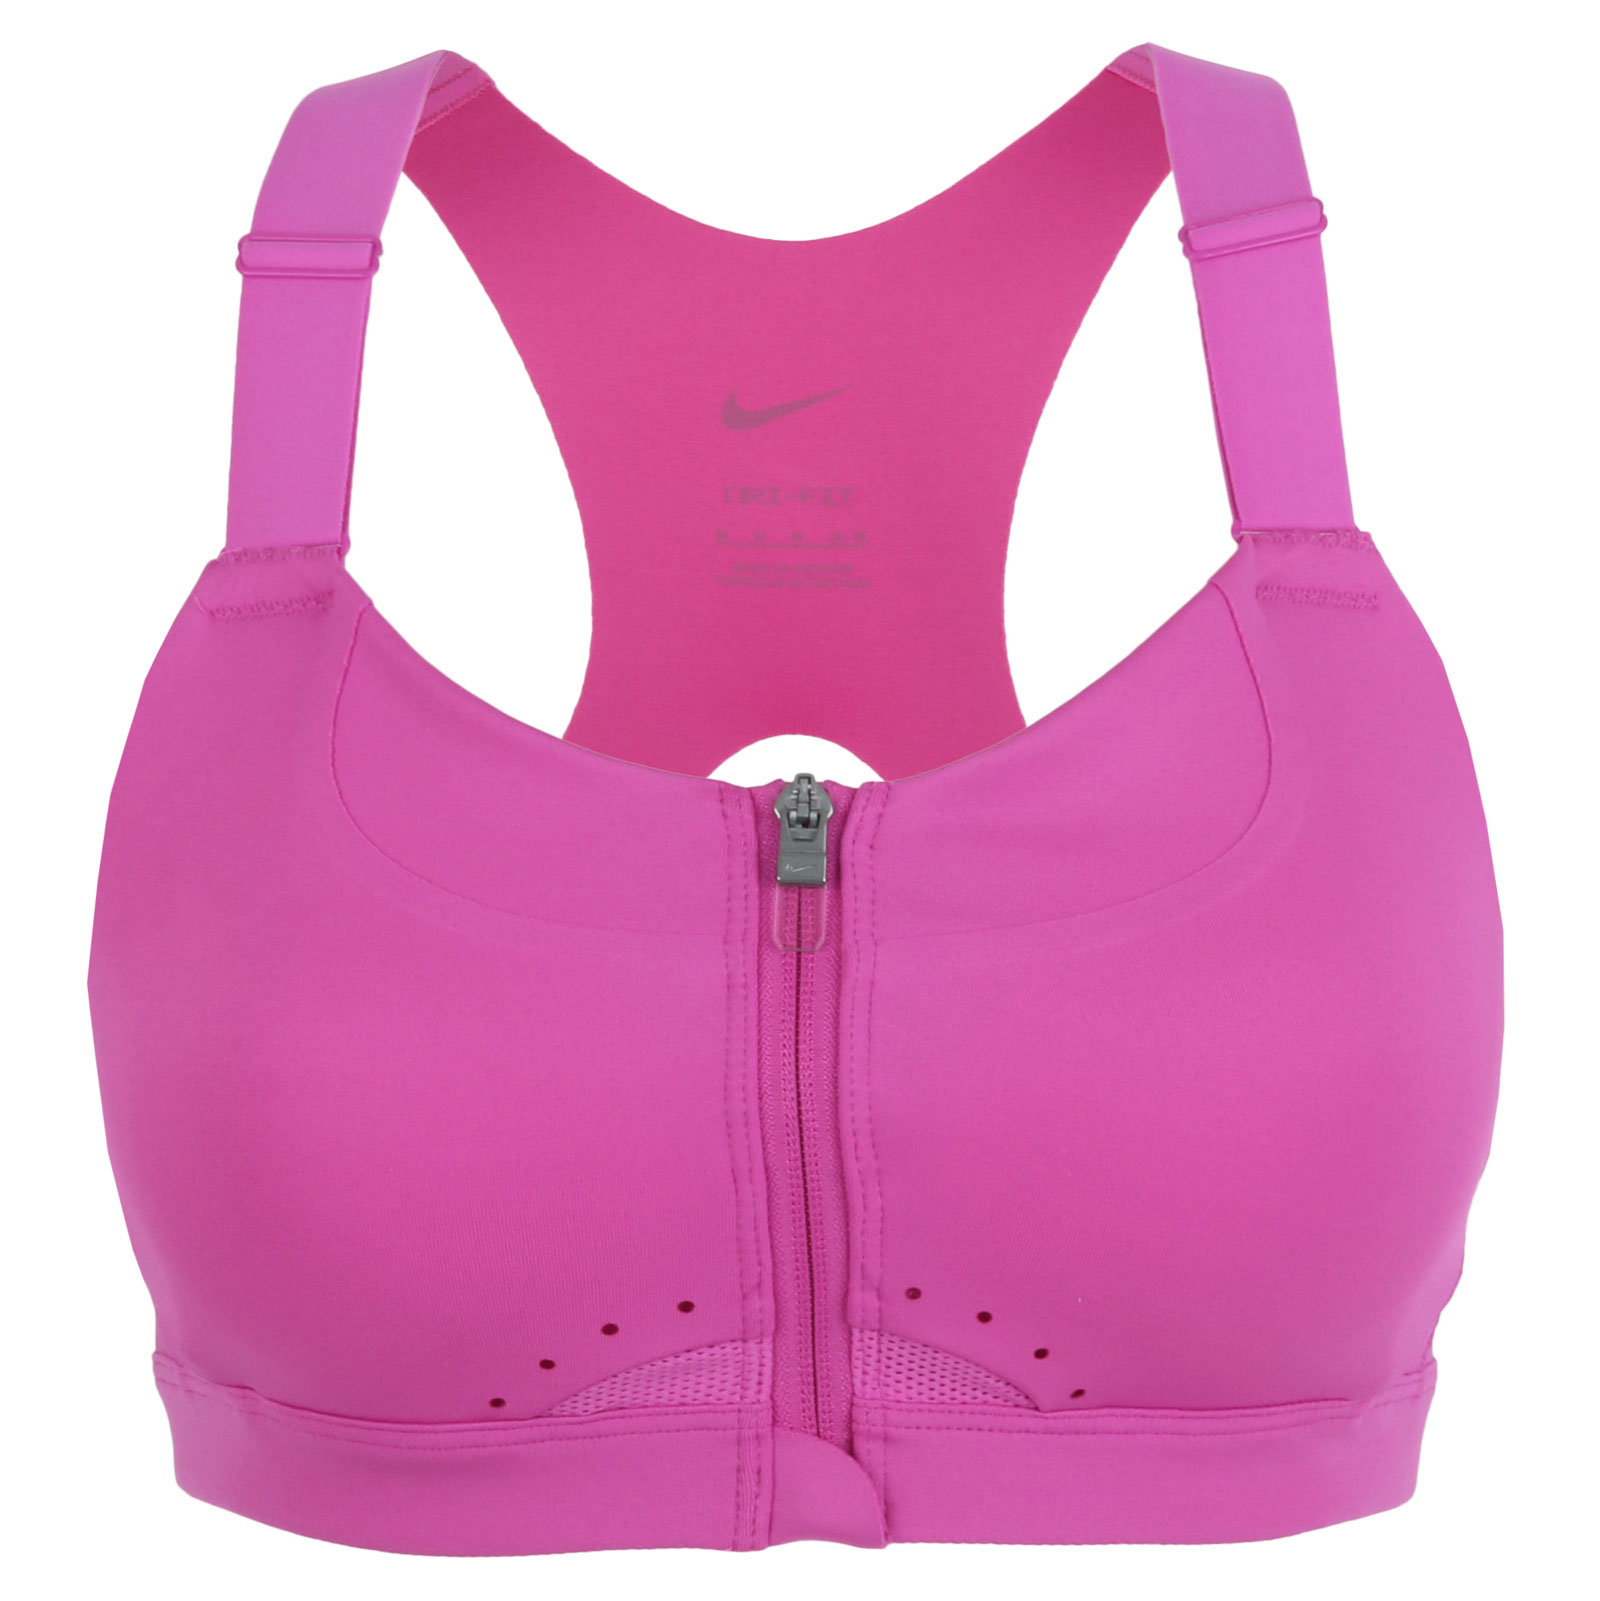 https://images.bike24.com/i/mb/10/7d/1d/nike-alpha-dri-fit-womens-high-support-padded-front-zip-sports-bra-cup-size-a-c-active-fuchsia-pink-spell-active-fuchsia-1518891.jpg